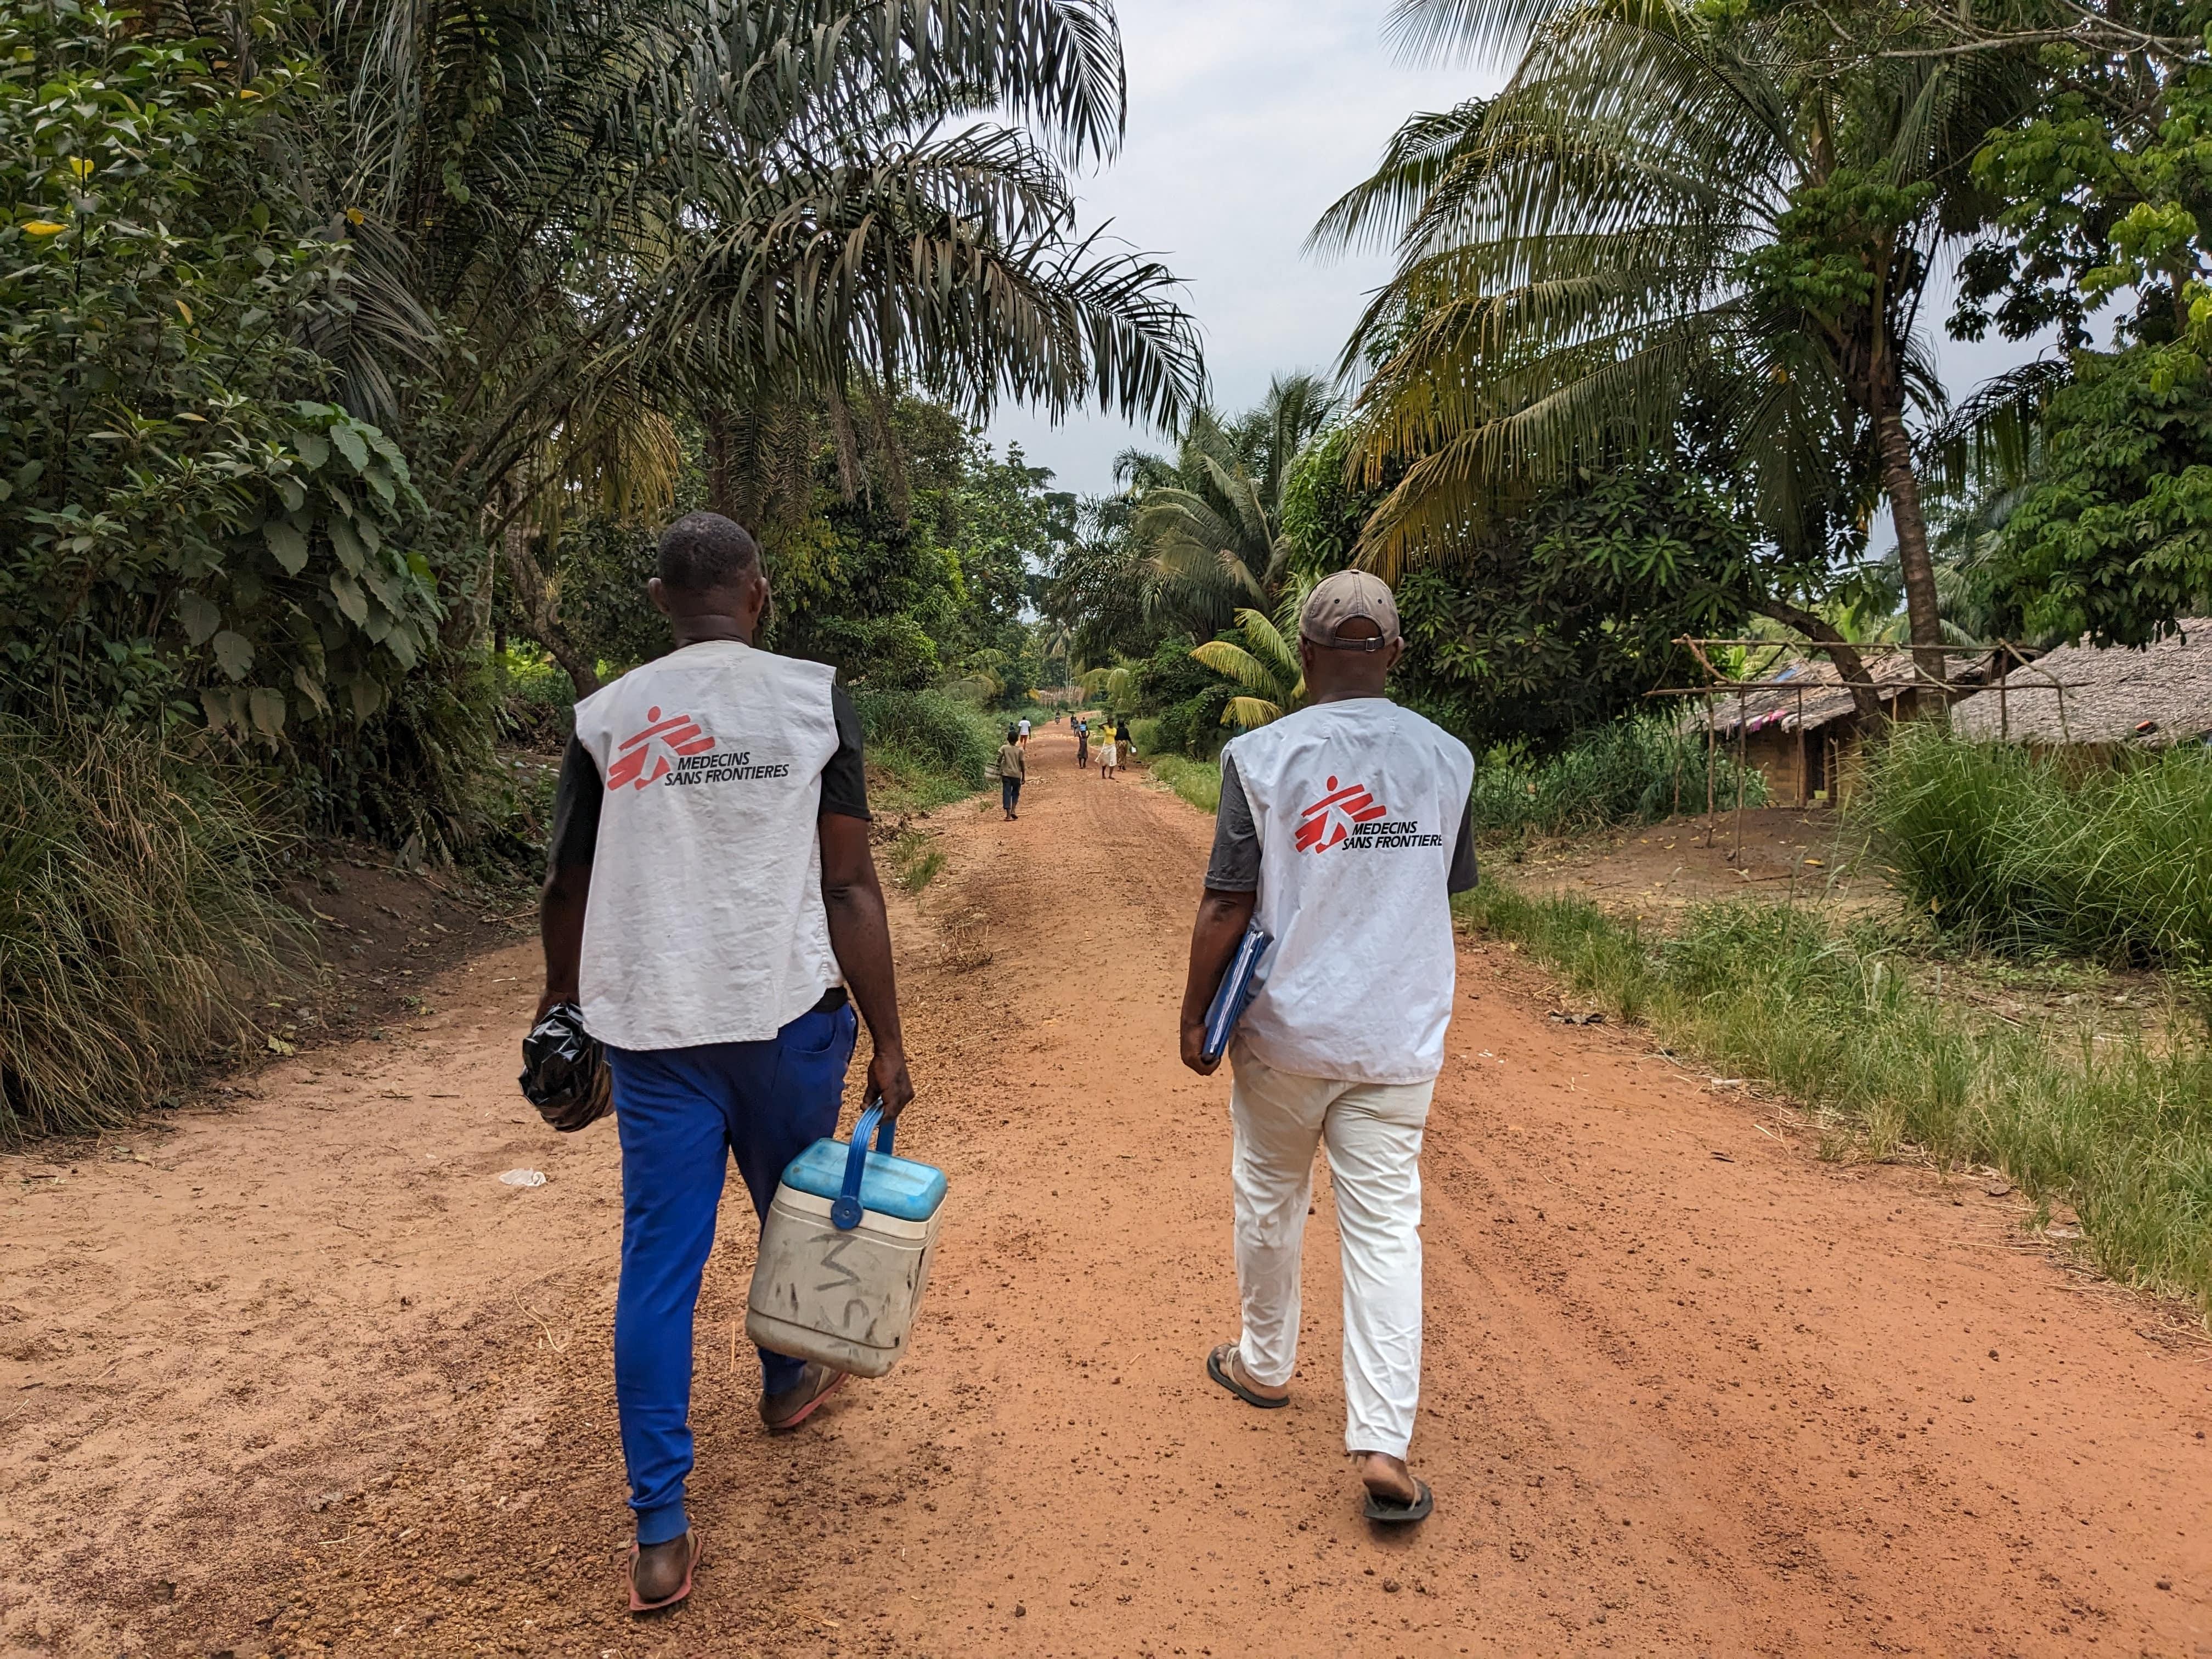 MSF Emergency Response DRC Measles: Vaccination teams, health promoters and community relays are working hard to raise awareness and get all the communities in the Ingende health zone involved in the measles vaccination campaign. Through this campaign, MSF teams managed to vaccinate 62,645 children aged between 6 months and 9 years against measles.